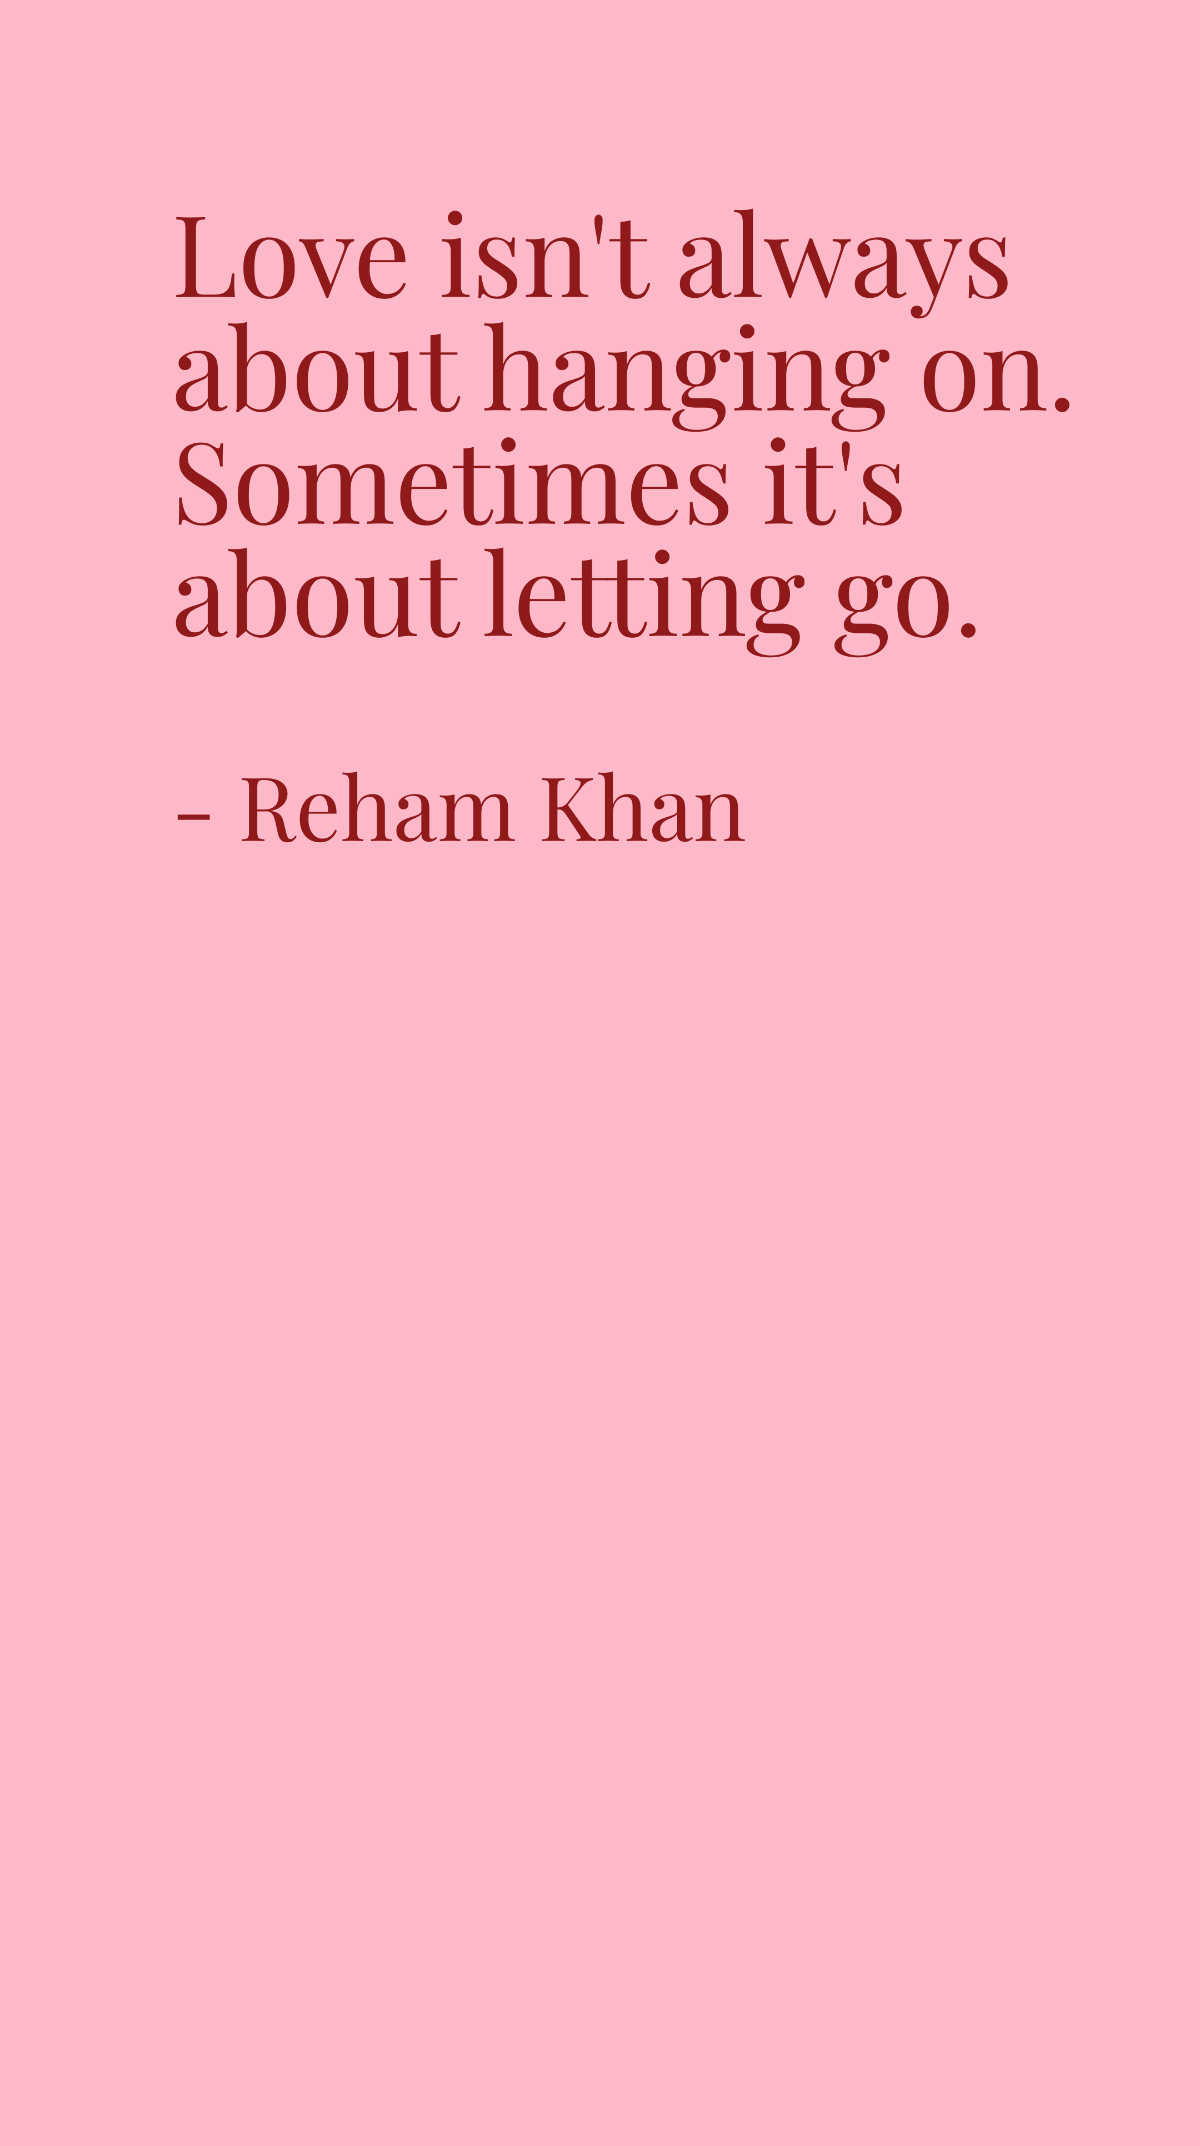 Reham Khan - Love isn't always about hanging on. Sometimes it's about letting go.